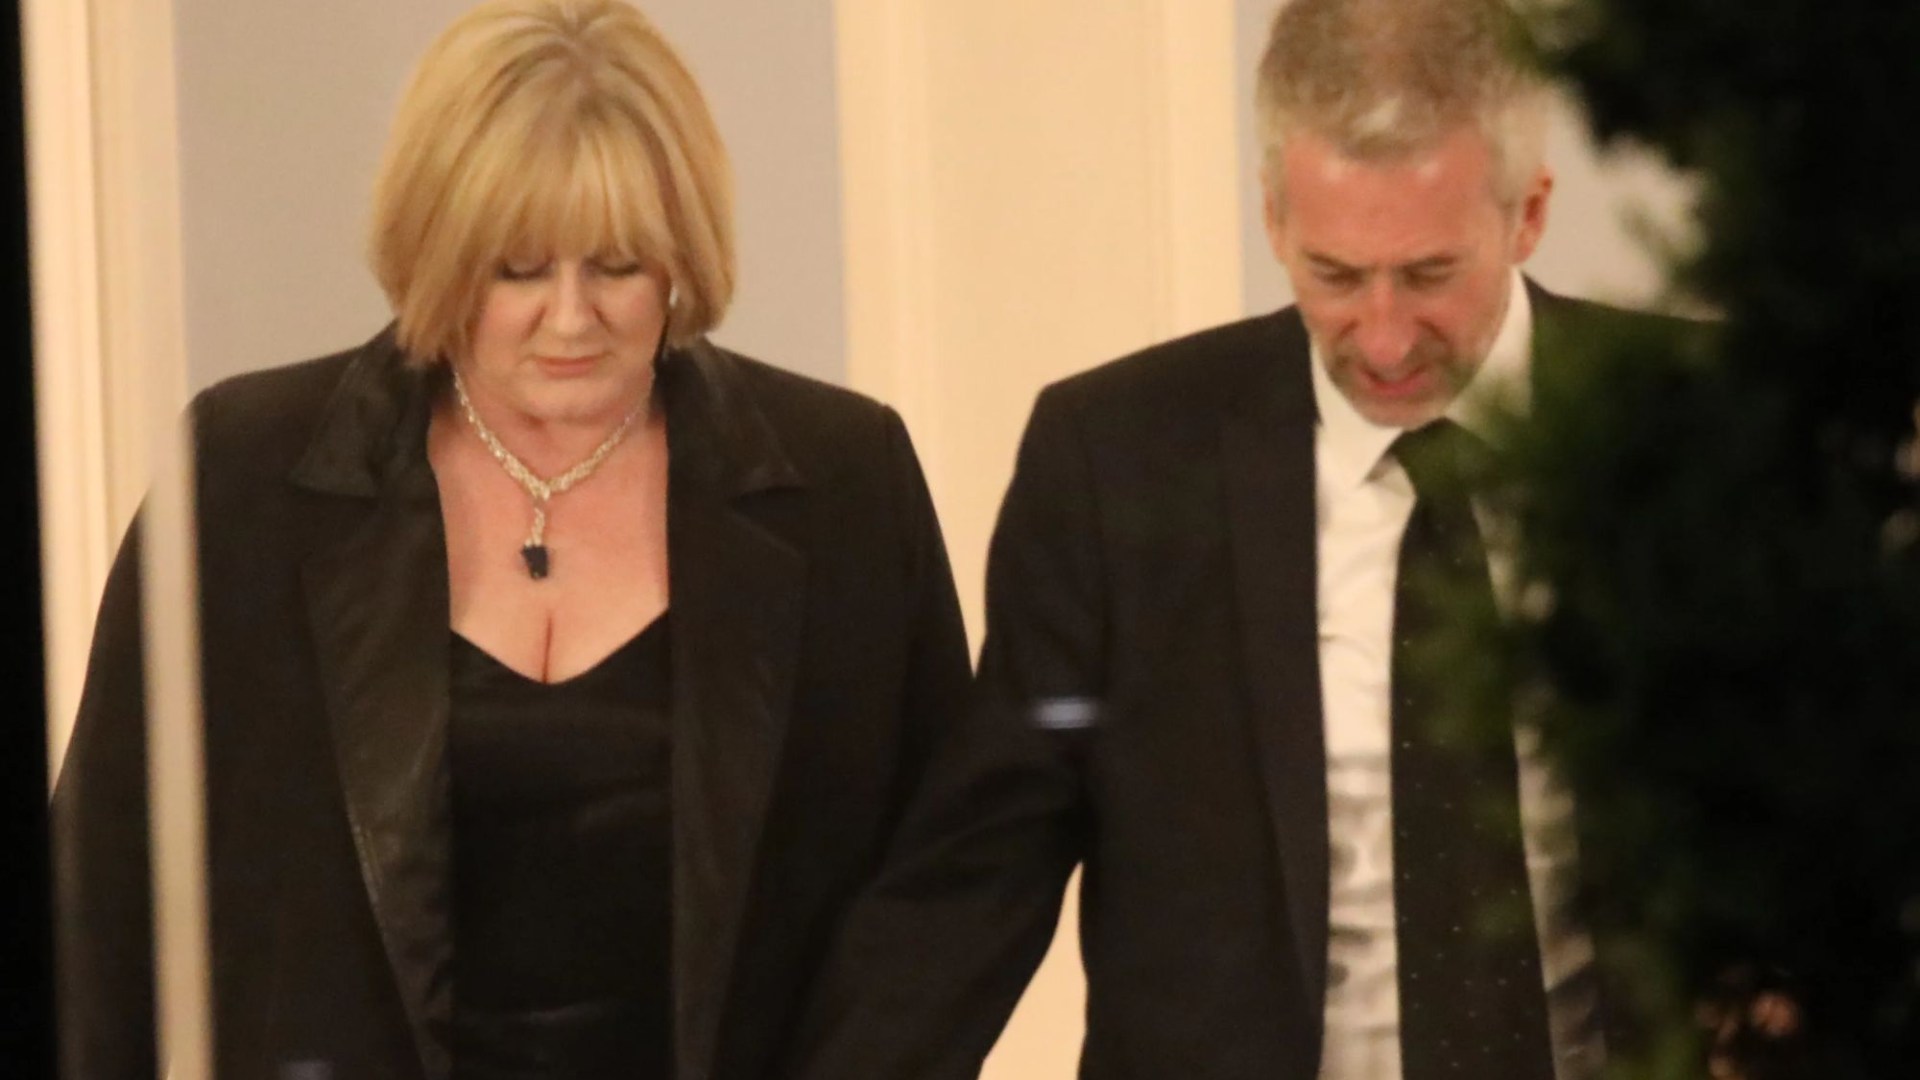 Happy Valley Star Sarah Lancashire Stuns in Rare Public Appearance with Husband of 23 Years at Prestigious Awards Ceremony